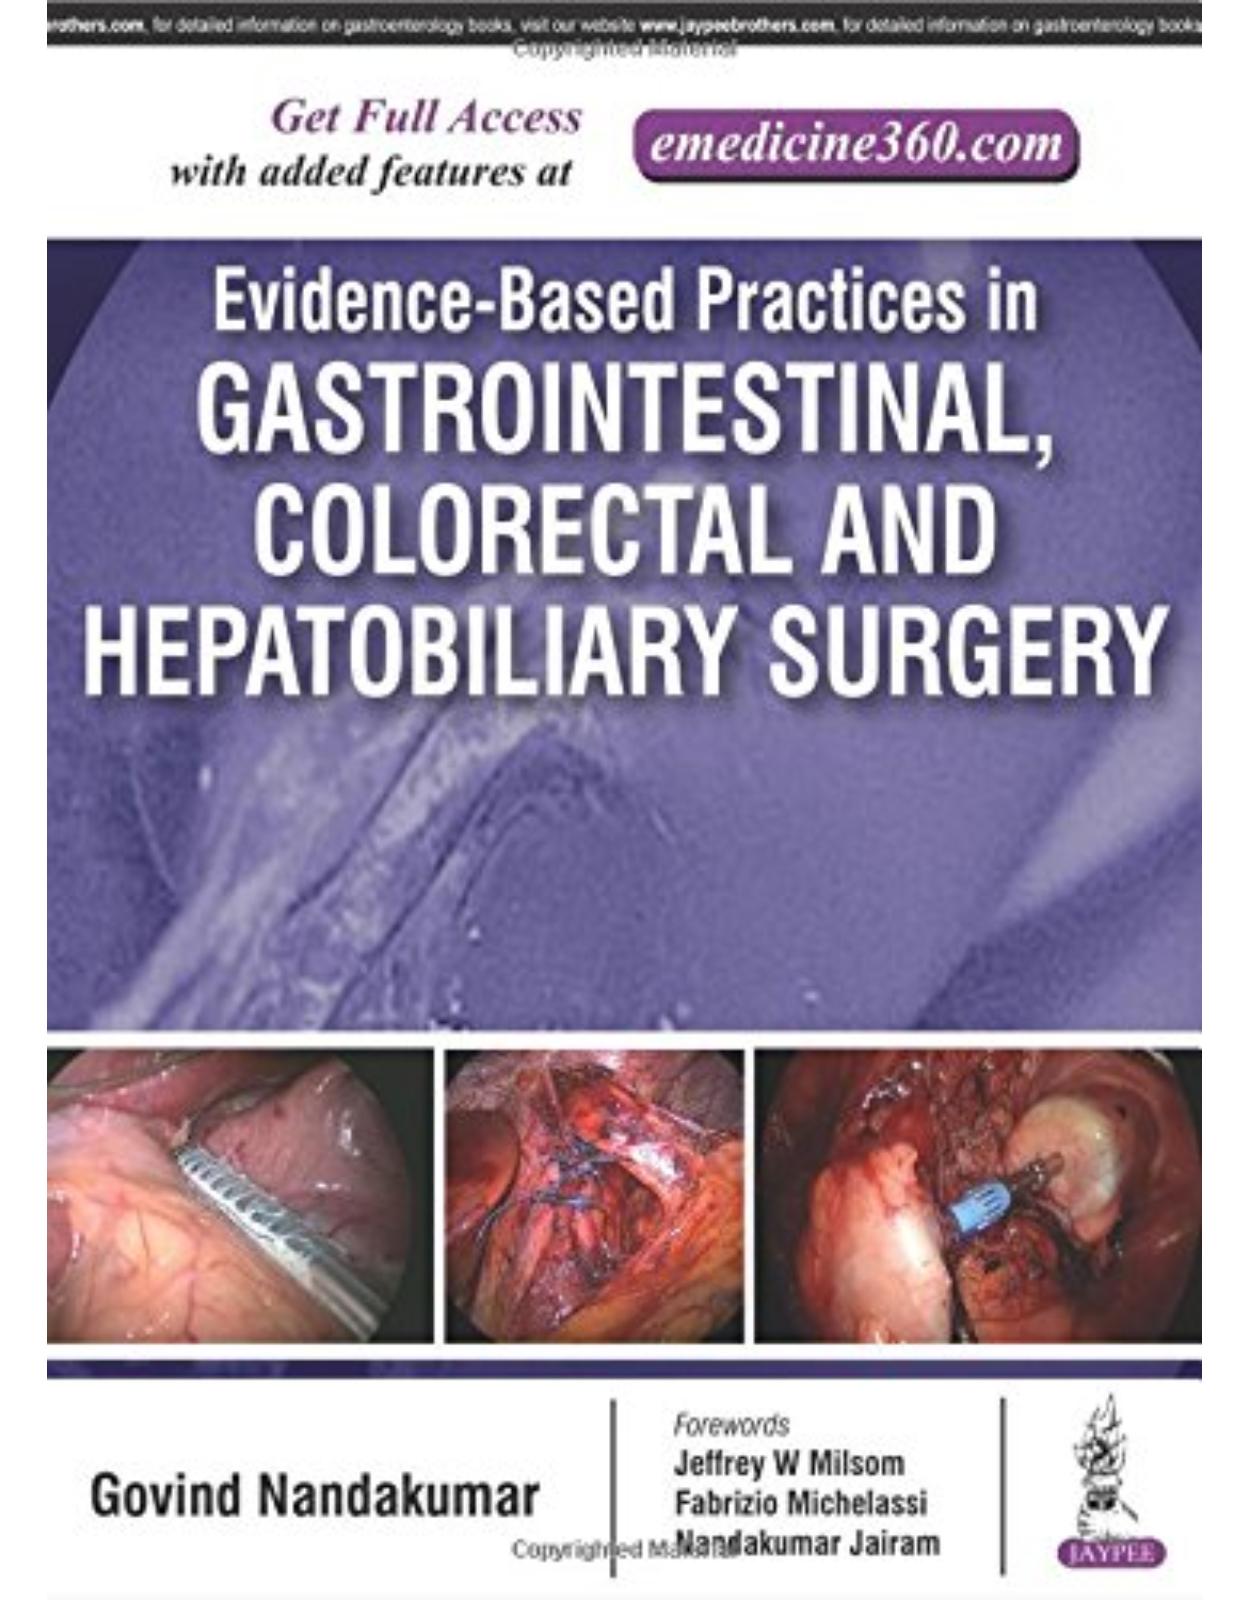 Evidence Based Practices in Gastrointestinal & Hepatobiliary Surgery